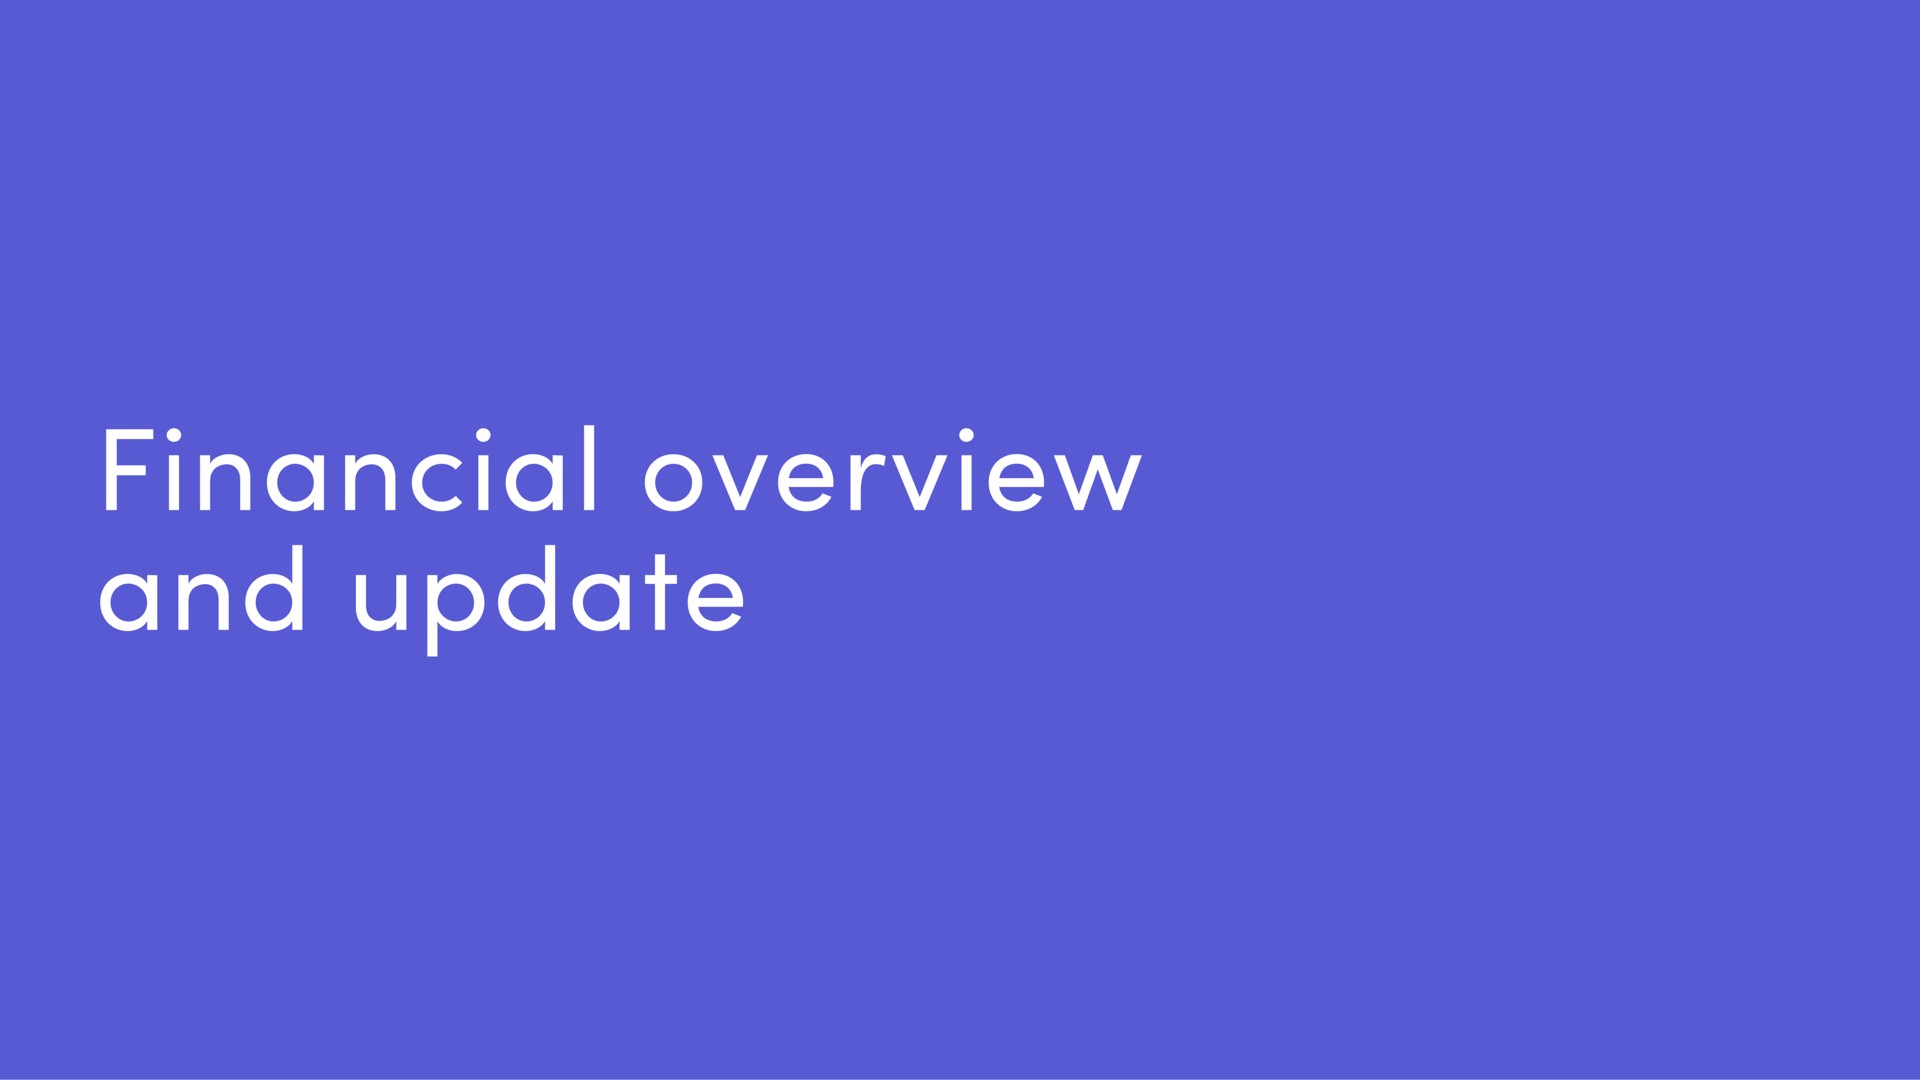 financial overview and update | monday.com